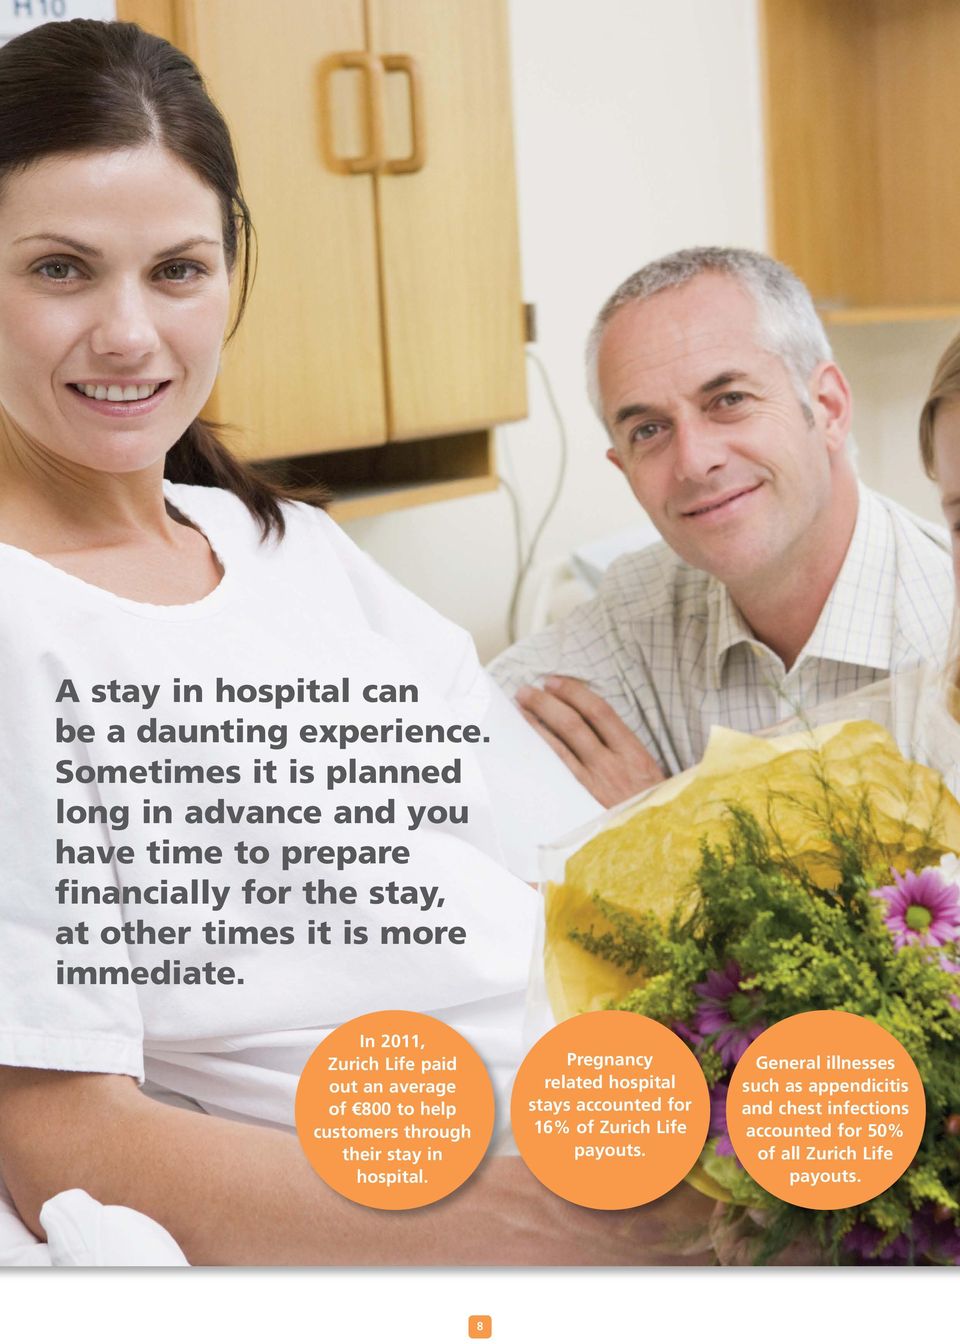 more immediate. In 2011, Zurich Life paid out an average of 800 to help customers through their stay in hospital.